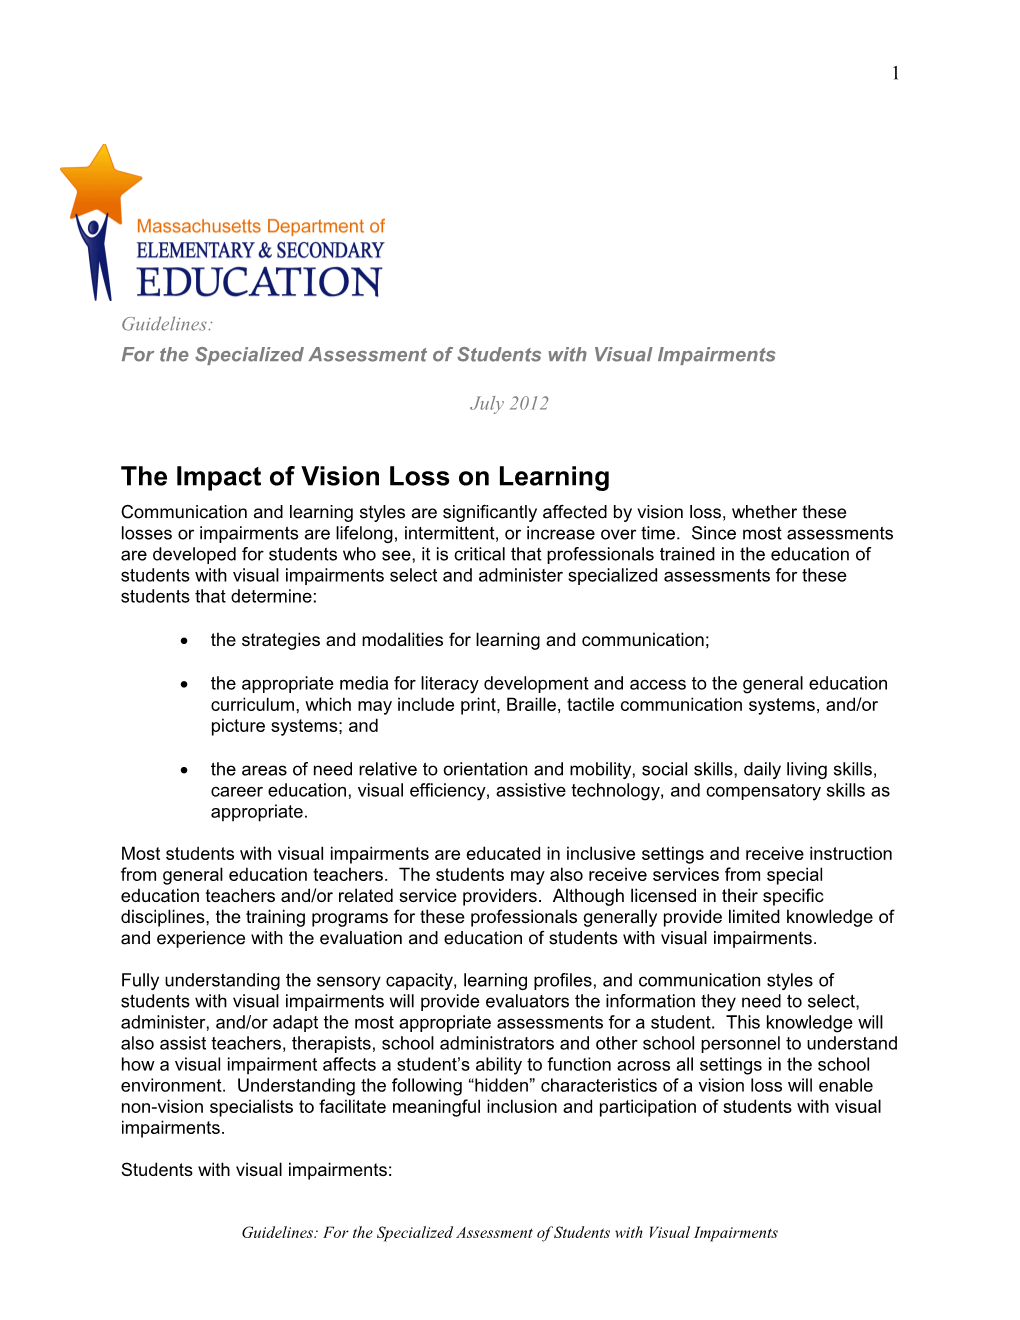 The Impact of Vision Loss on Learning